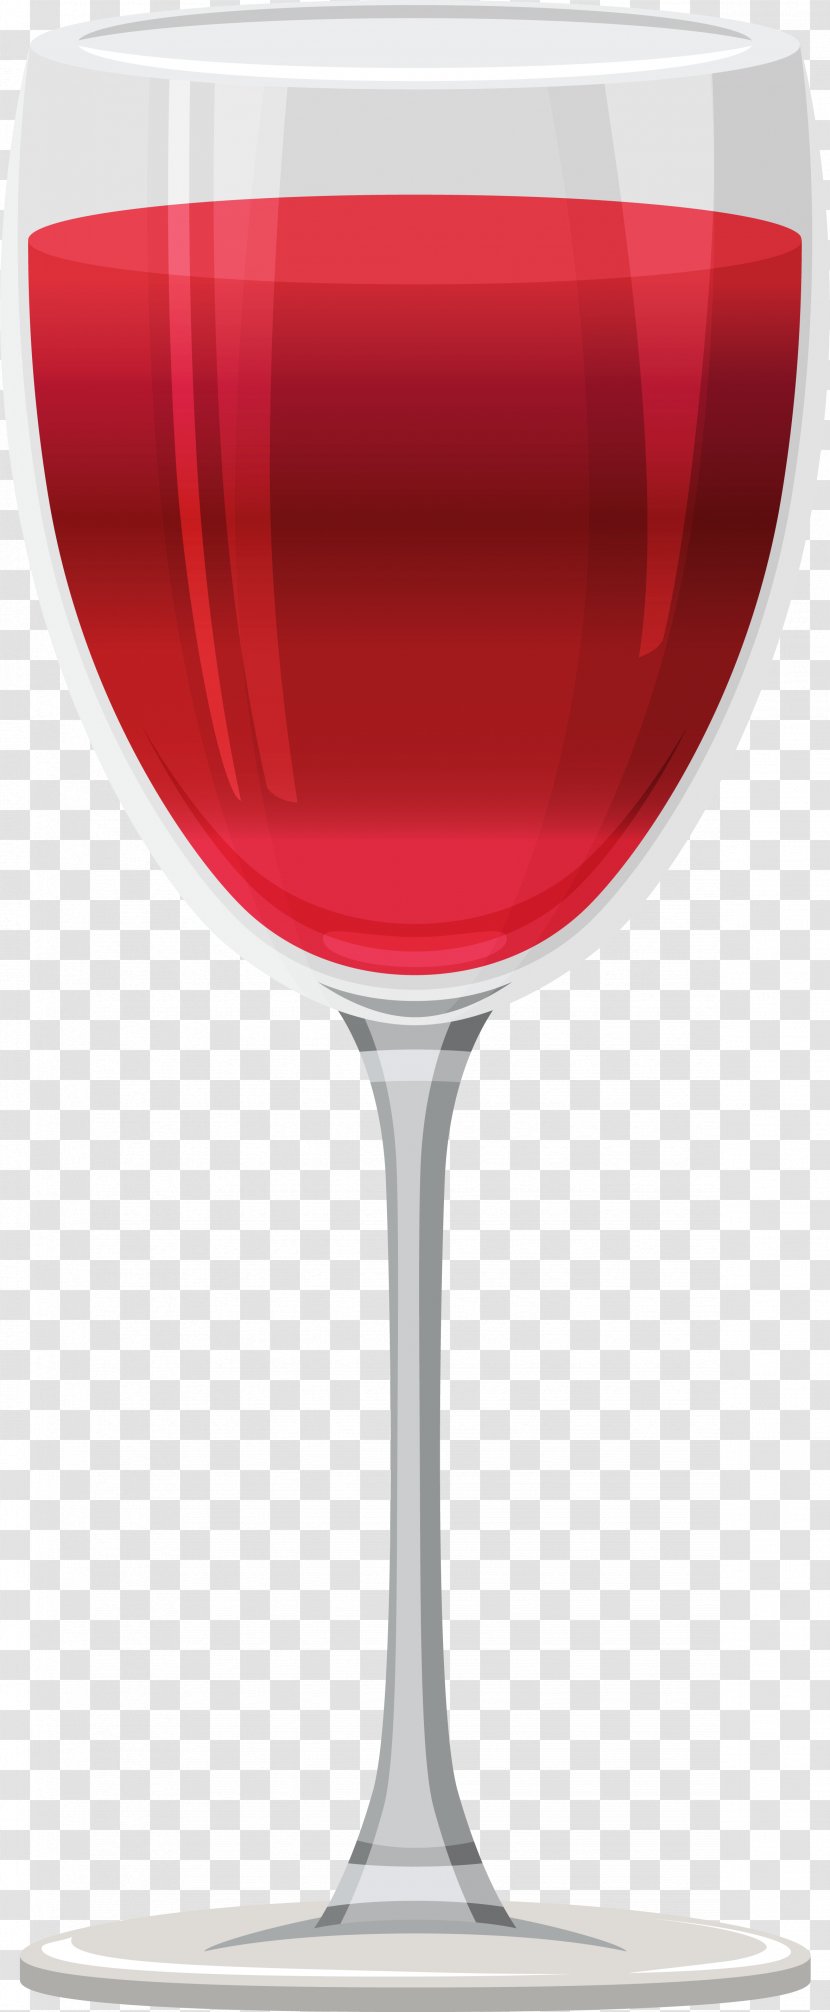 Wine Glass Champagne - Drink Transparent PNG